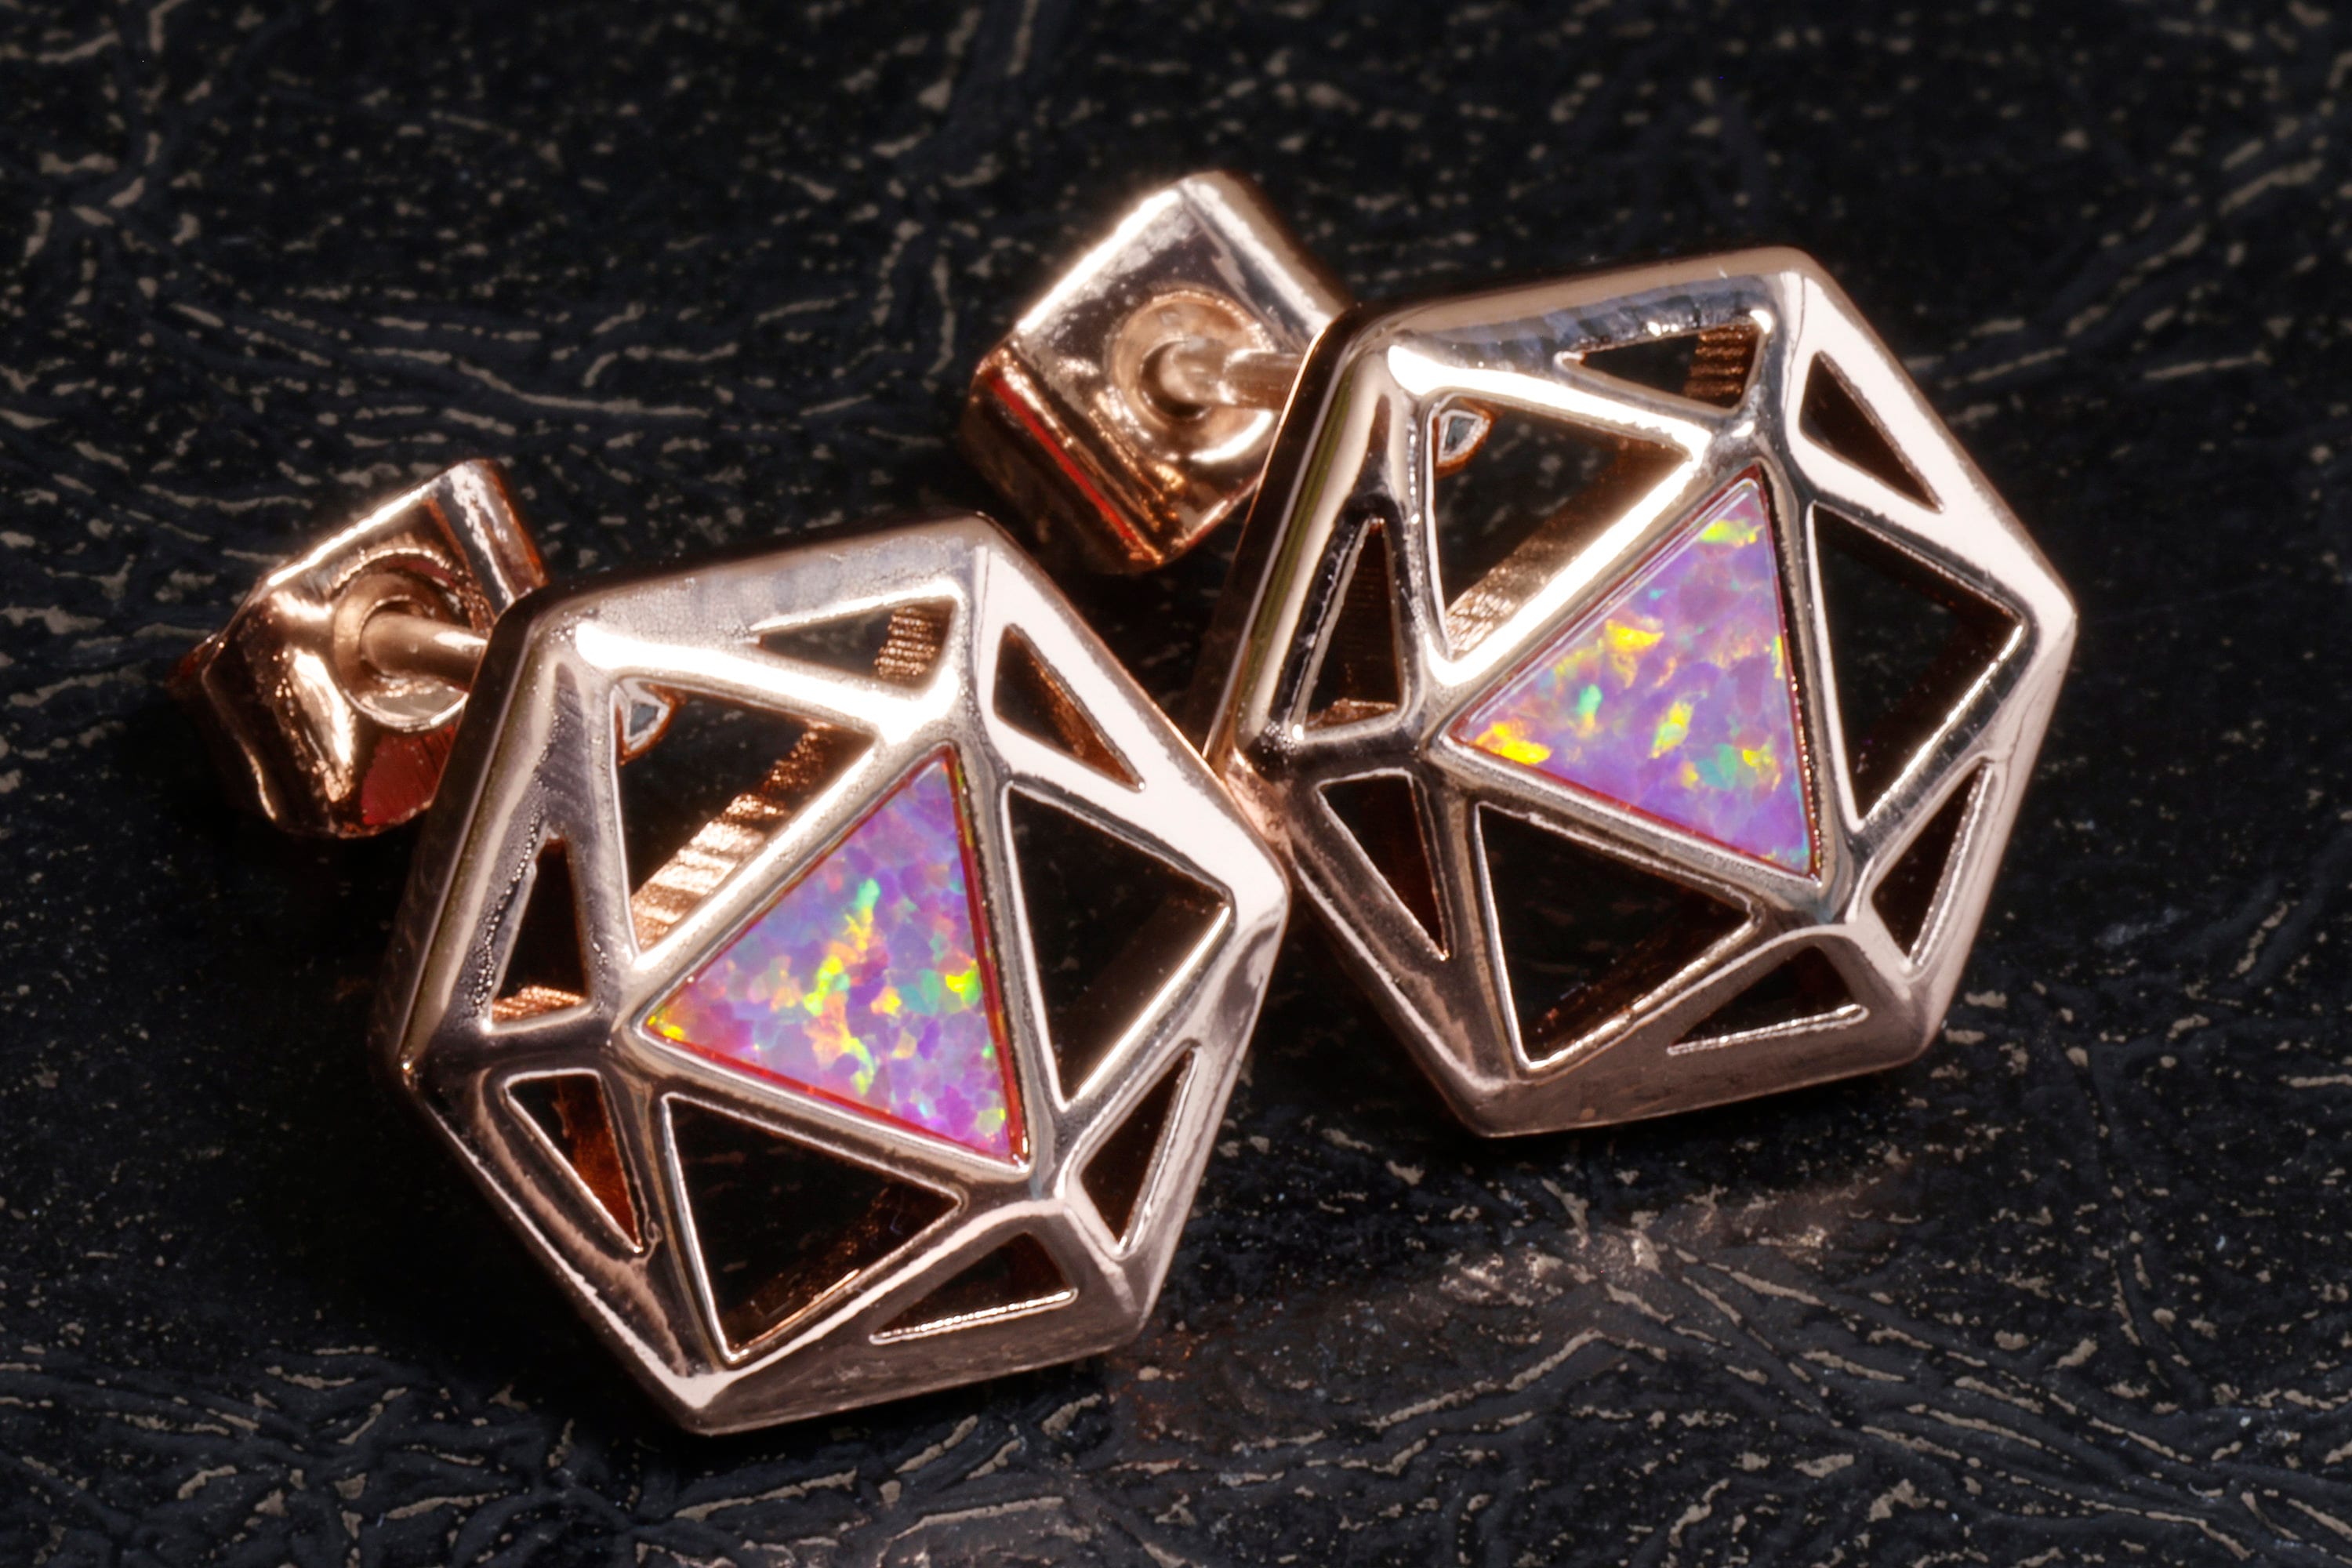 D20 Dice stud earrings, Rose gold dice earrings with light red opal